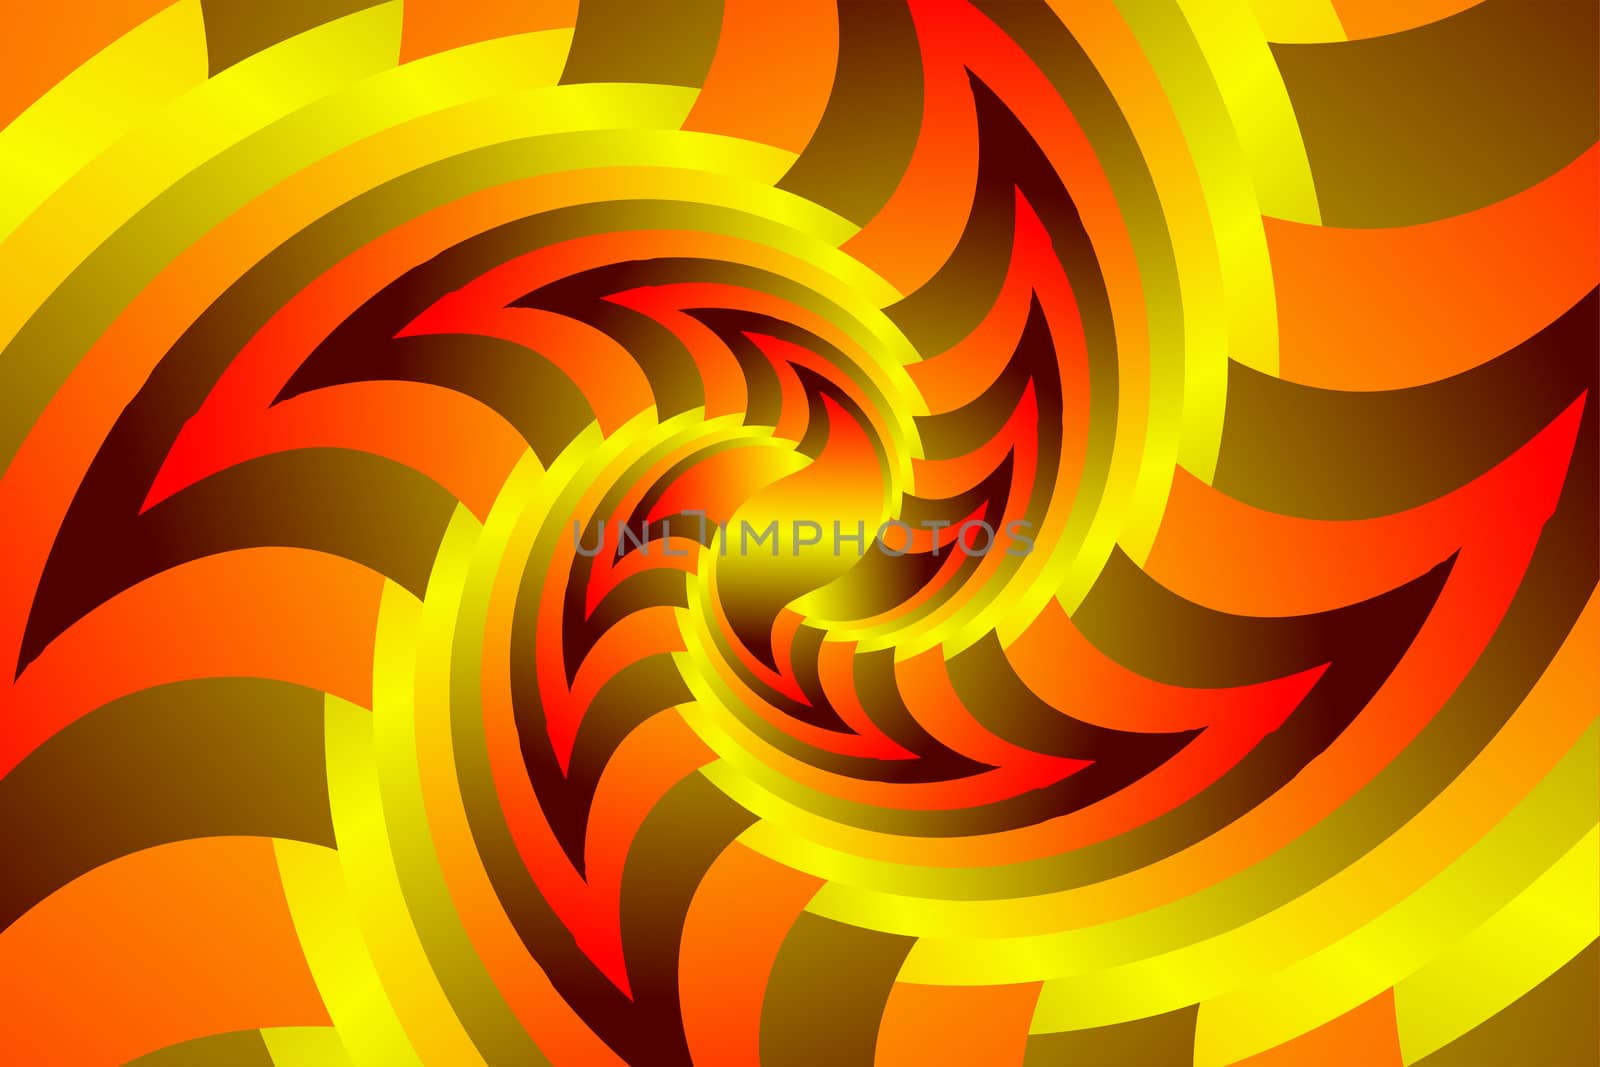 Infinite geometry fractal background of spiral jigsaw puzzle by Photochowk